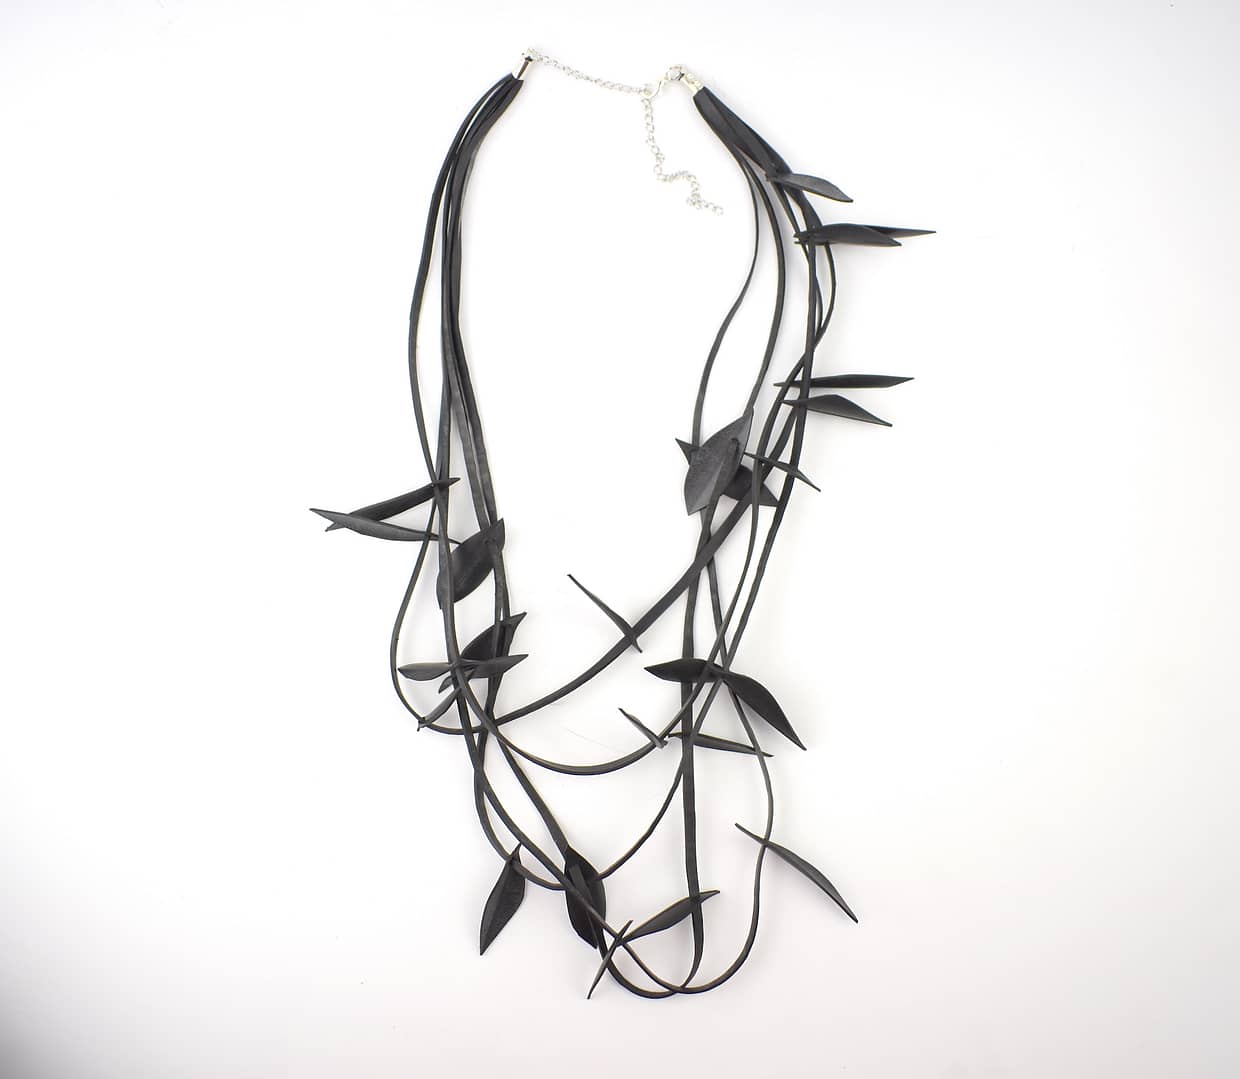 Recyled Jewellery: A multi-strand Birds on Wire Necklace featuring black faux leather ribbons and metallic arrowhead accents, crafted from repurposed materials, displayed against a white background. @ Reblack Shop